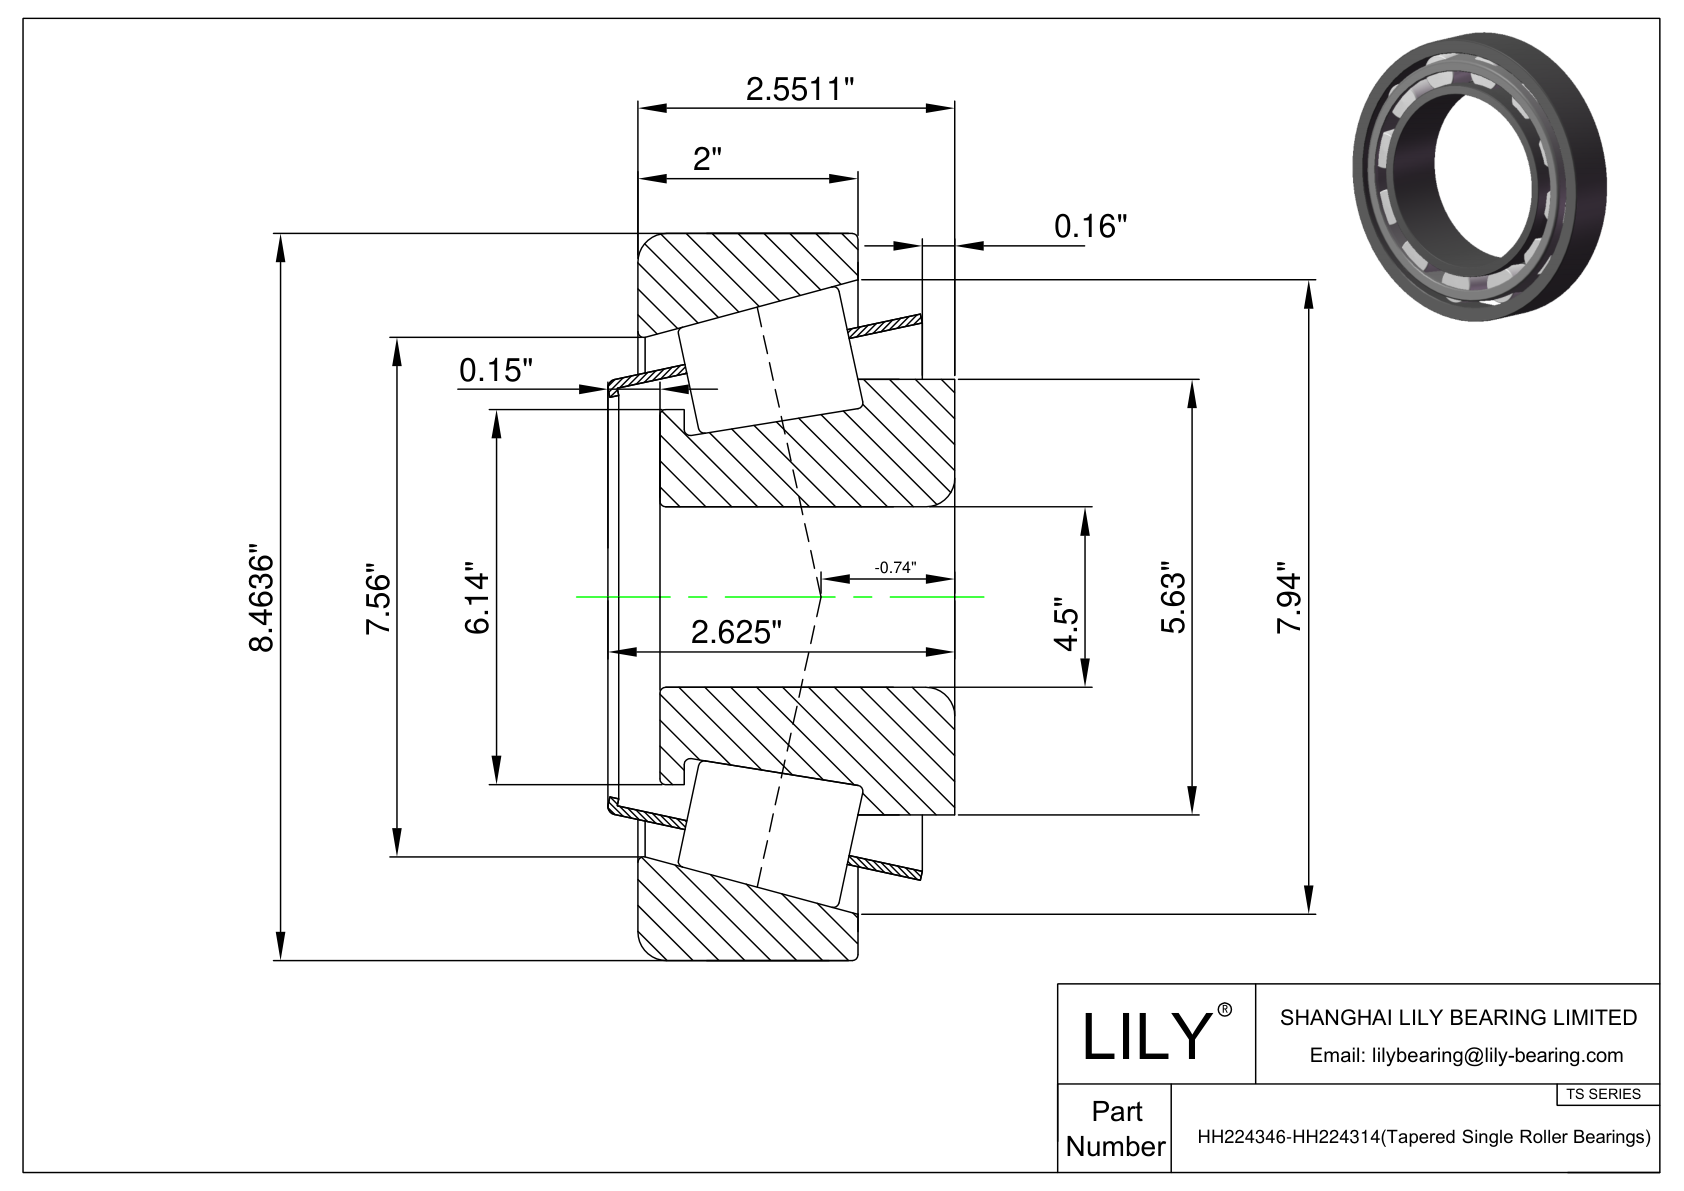 HH224346-HH224314 TS (Tapered Single Roller Bearings) (Imperial) cad drawing